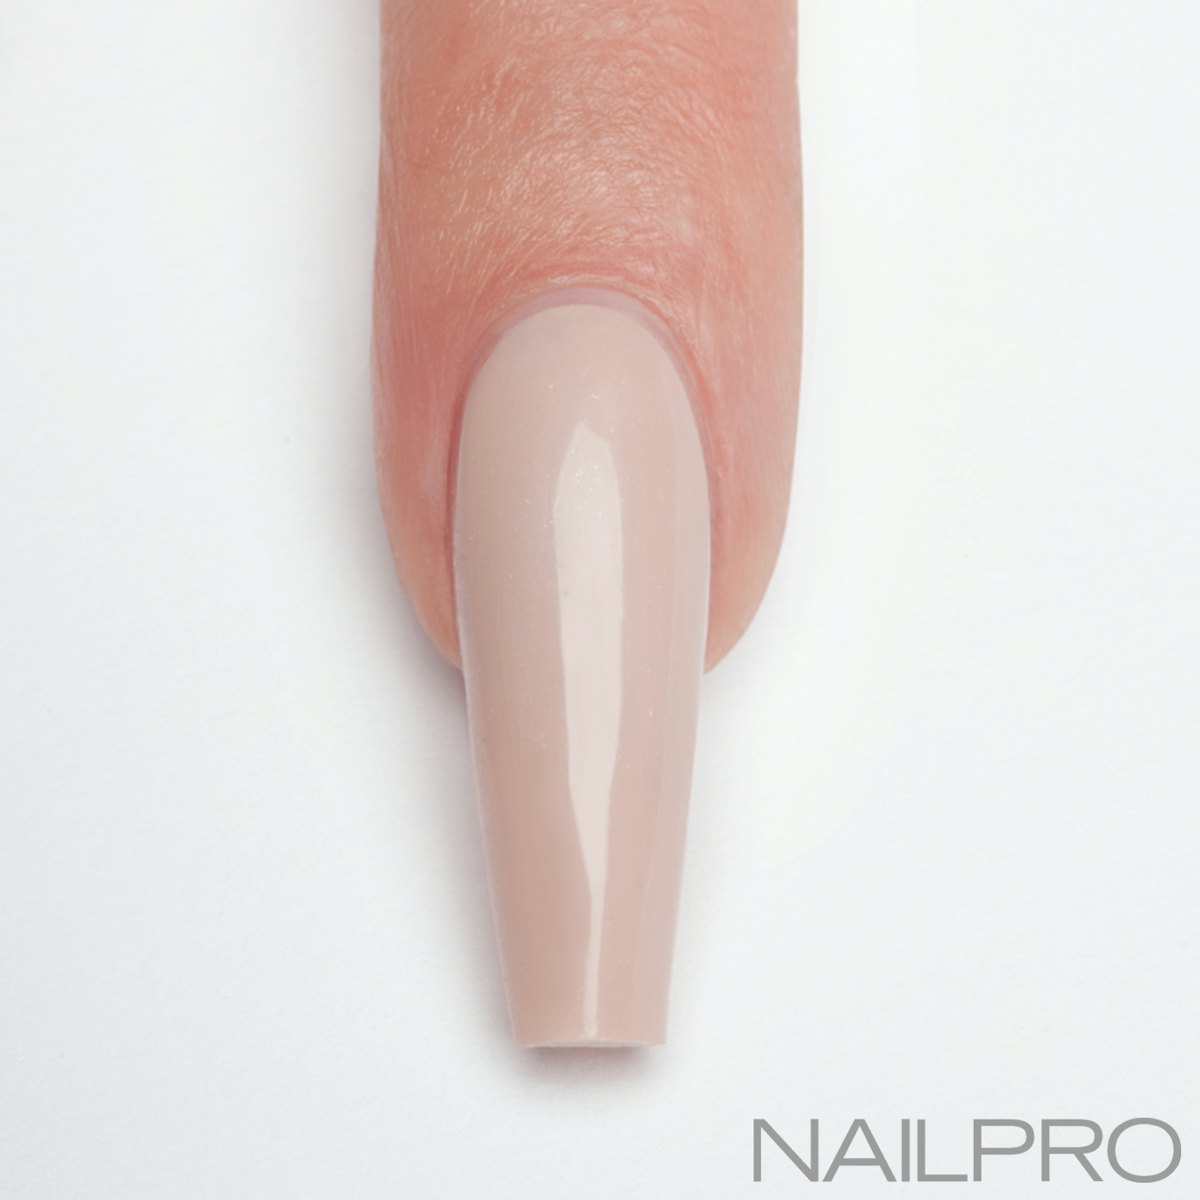 Expert Advice On How To File The Most-Requested Nail Shapes | Nailpro